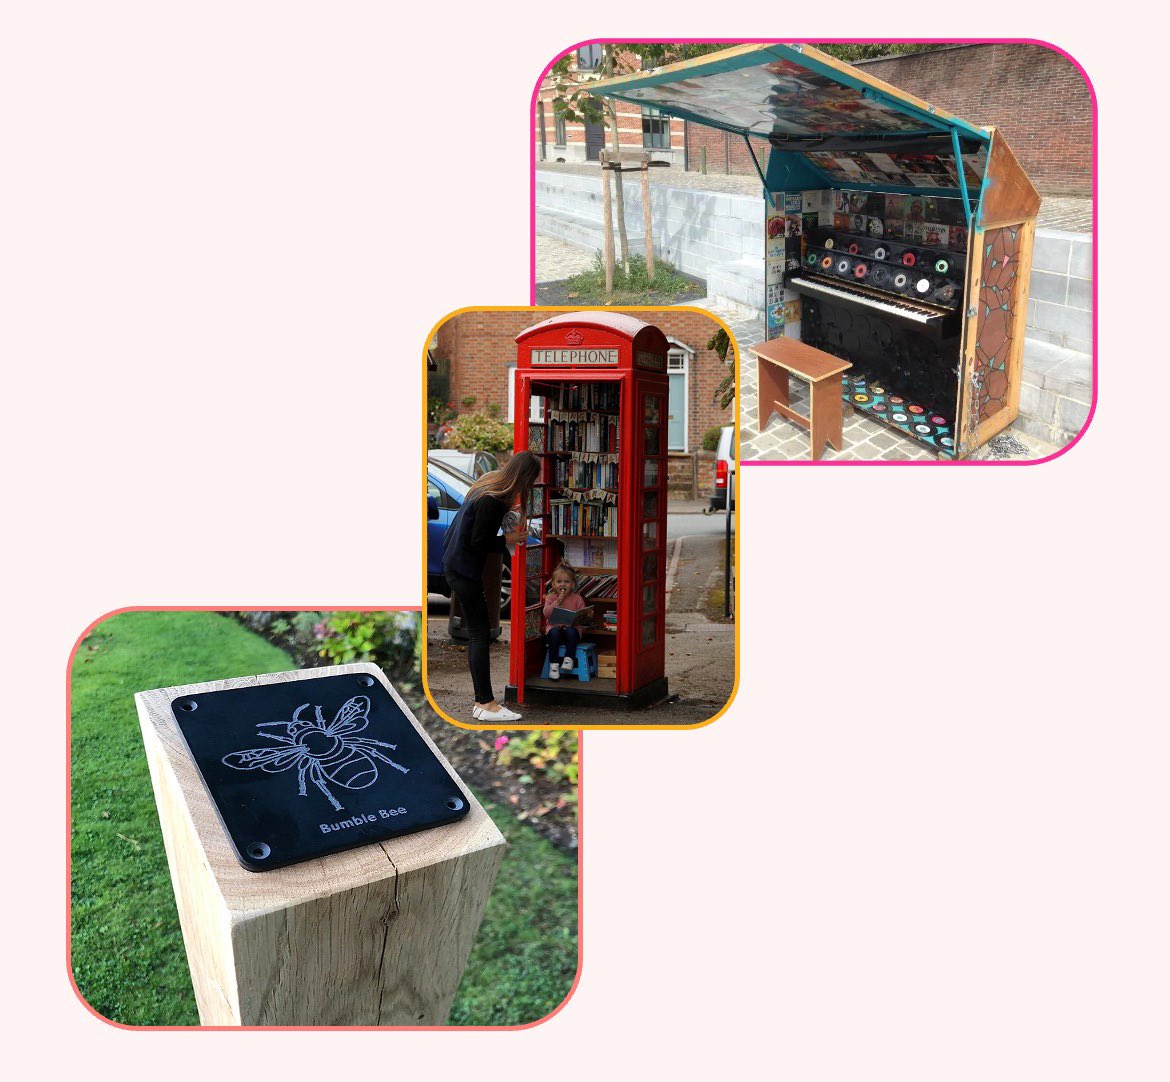 Help #theUPgarden add a book exchange, community piano & nature trail!

Deadline *Thursday* to fill in this short survey. Your answers will help our application to LB Newham's #PeoplePoweredPlaces funding scheme! bit.ly/45rl0Fb